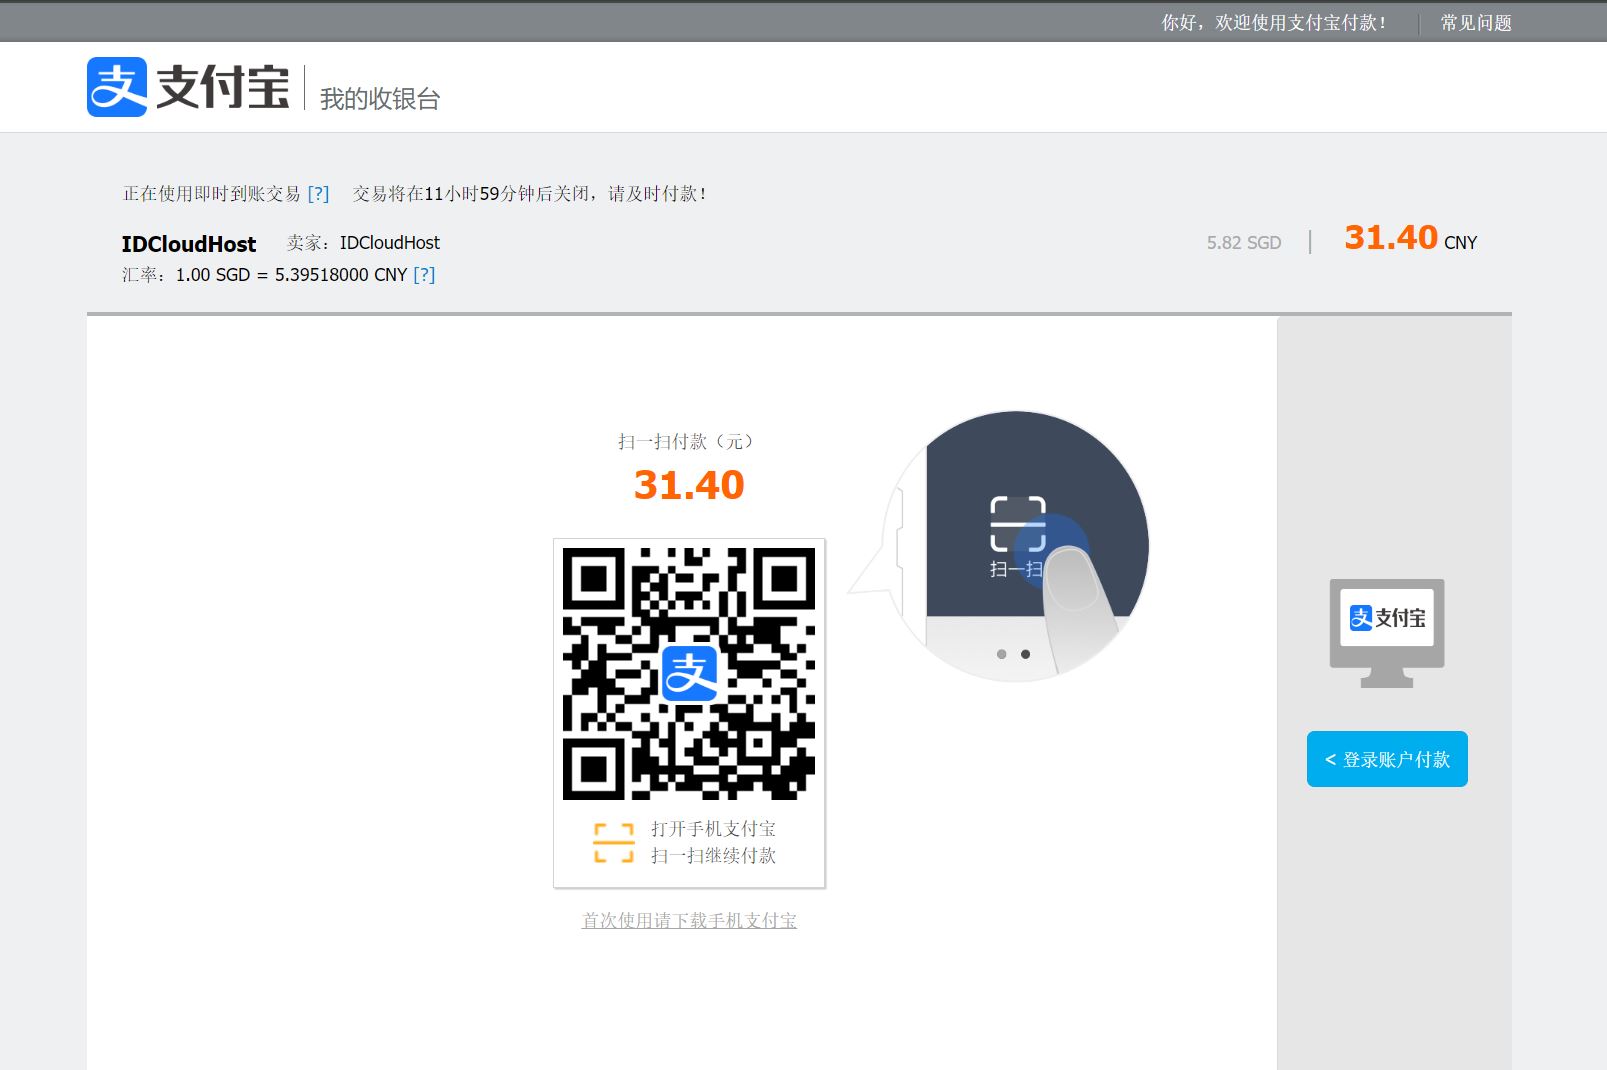 How To Top Up IDCloudHost Credit Balance Using Alipay